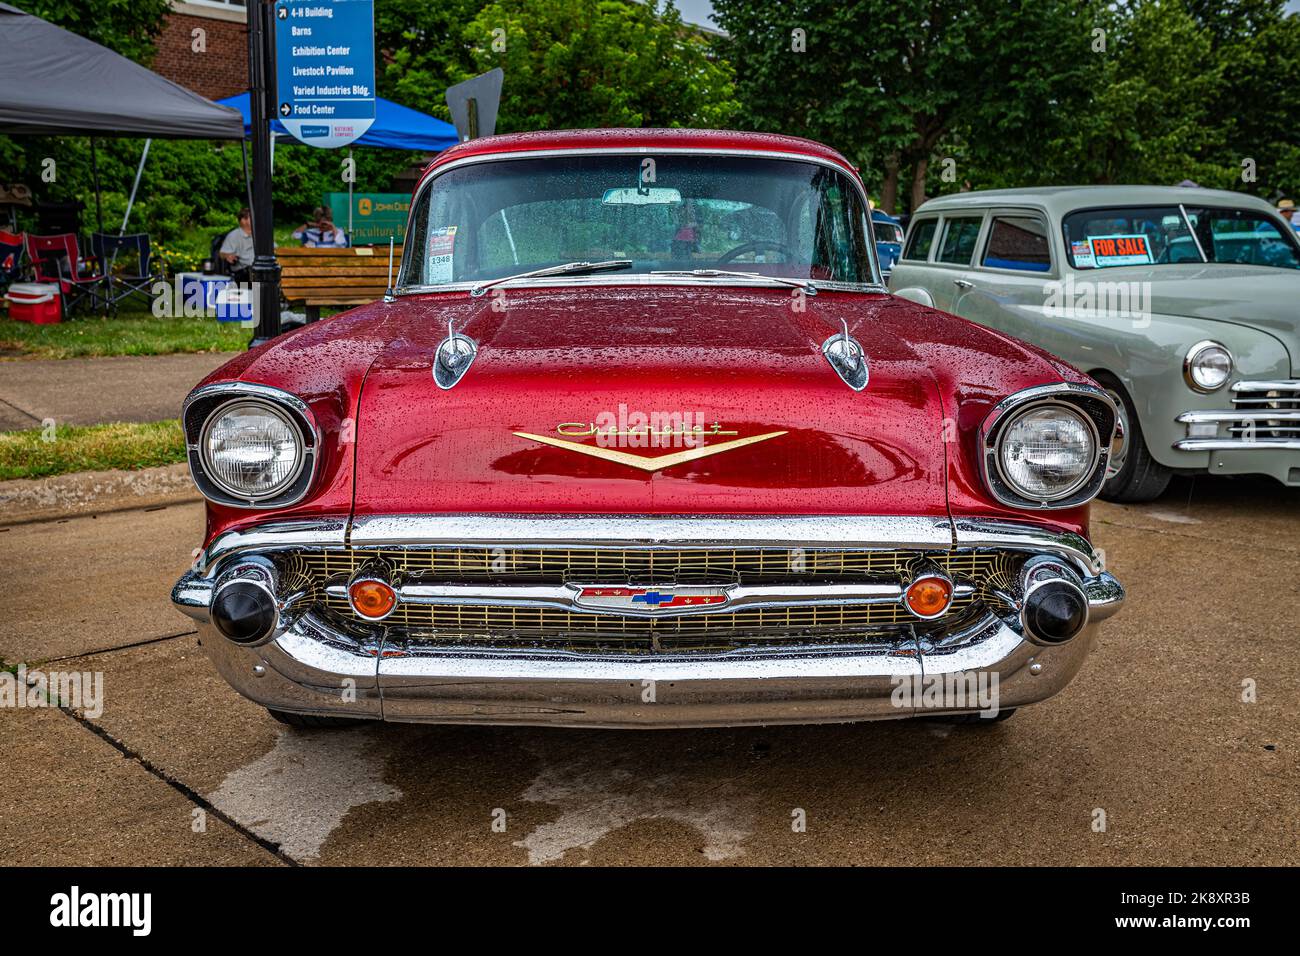 Des Moines, IA - July 01, 2022: High perspective front view of a 1957 Chevrolet BelAir Coupe at a local car show. Stock Photo